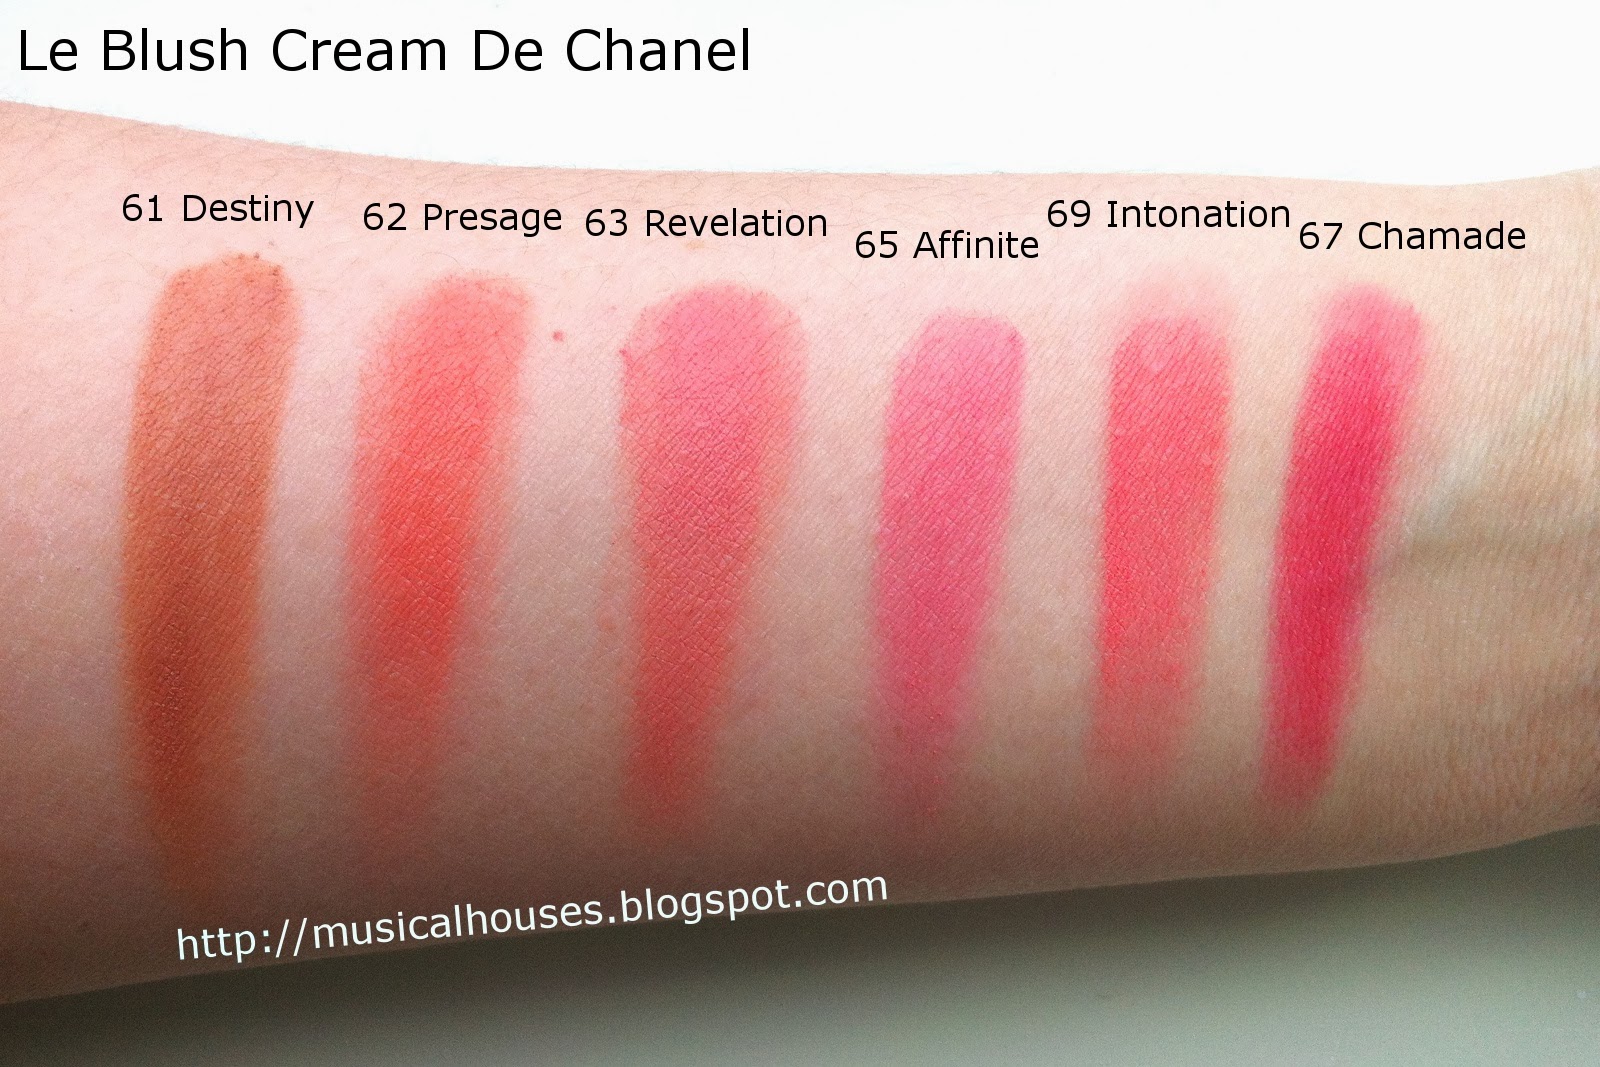 ledsager Behandling peber Chanel Le Blush Cream De Chanel Swatches - of Faces and Fingers